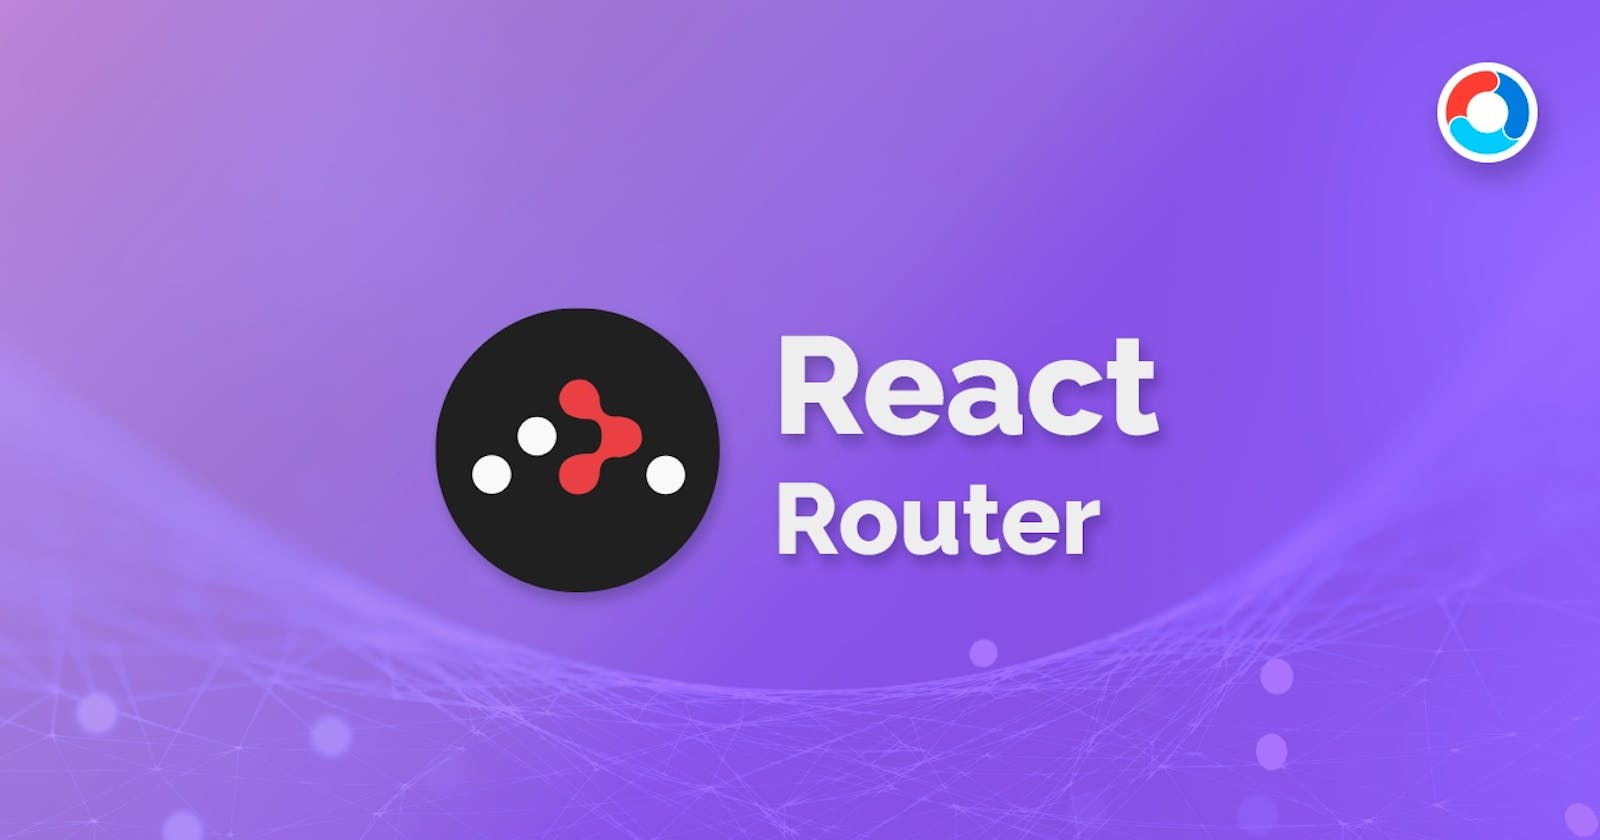 A Convenient feature offered by React Router